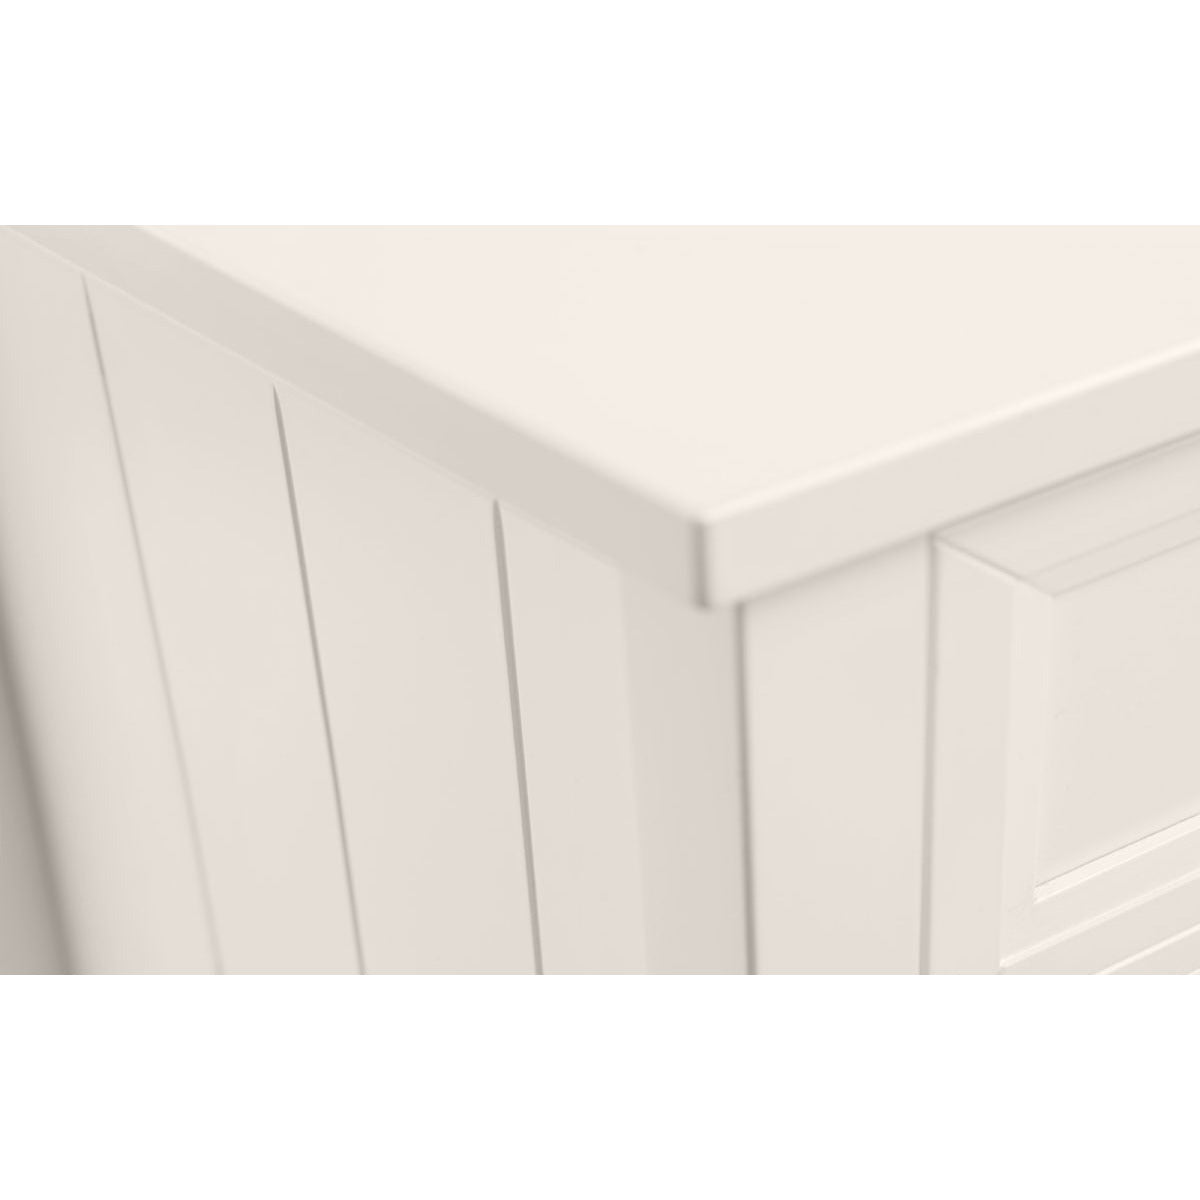 MAINE 5 DRAWER TALL CHEST - DOVE GREY